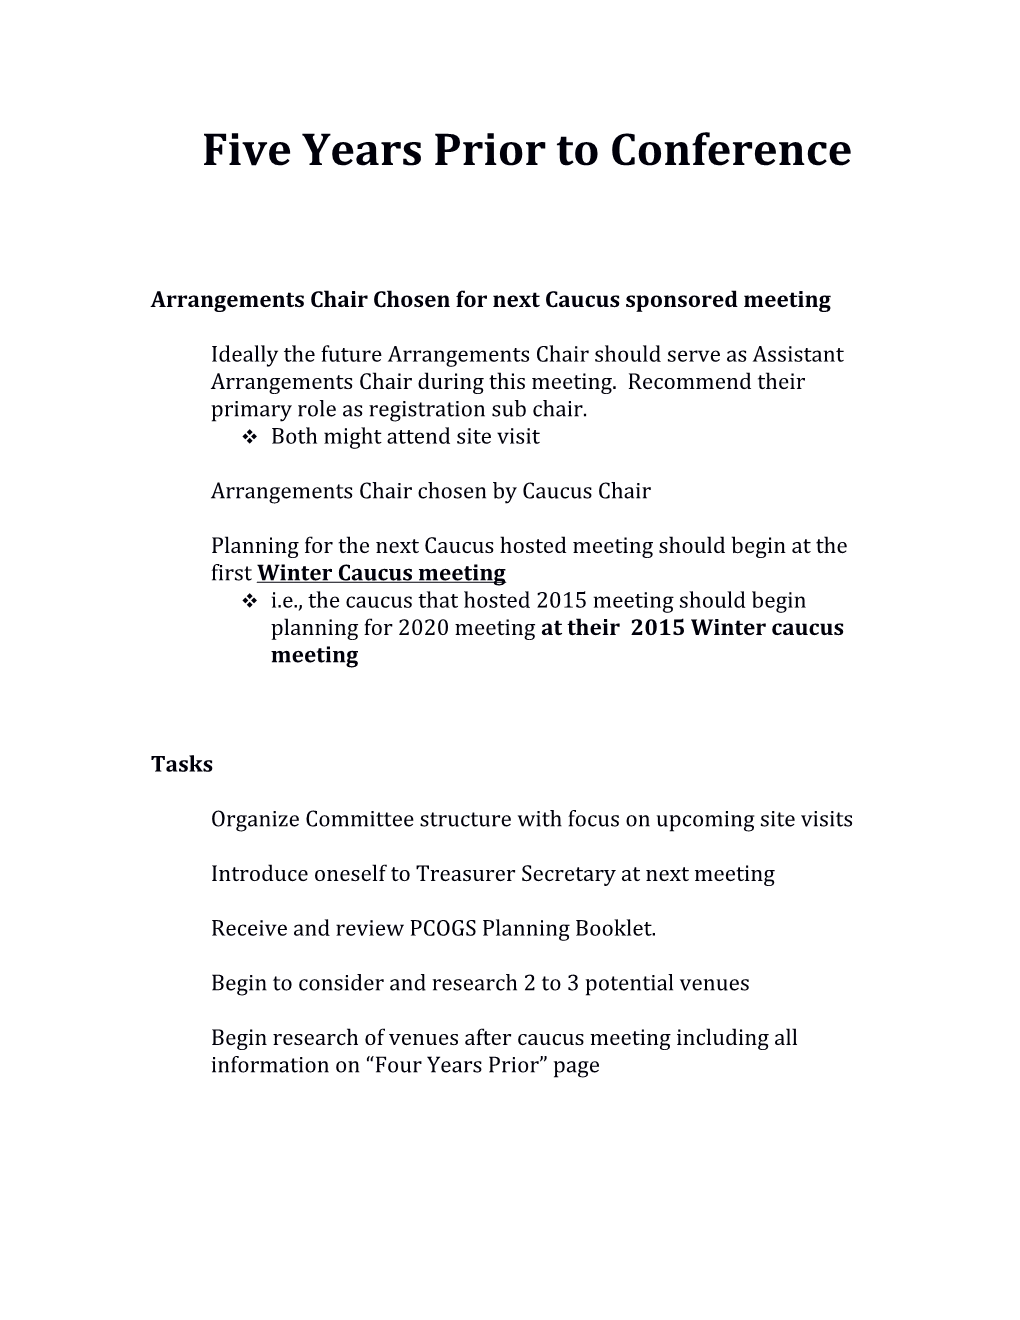 Five Year Planning Booklet